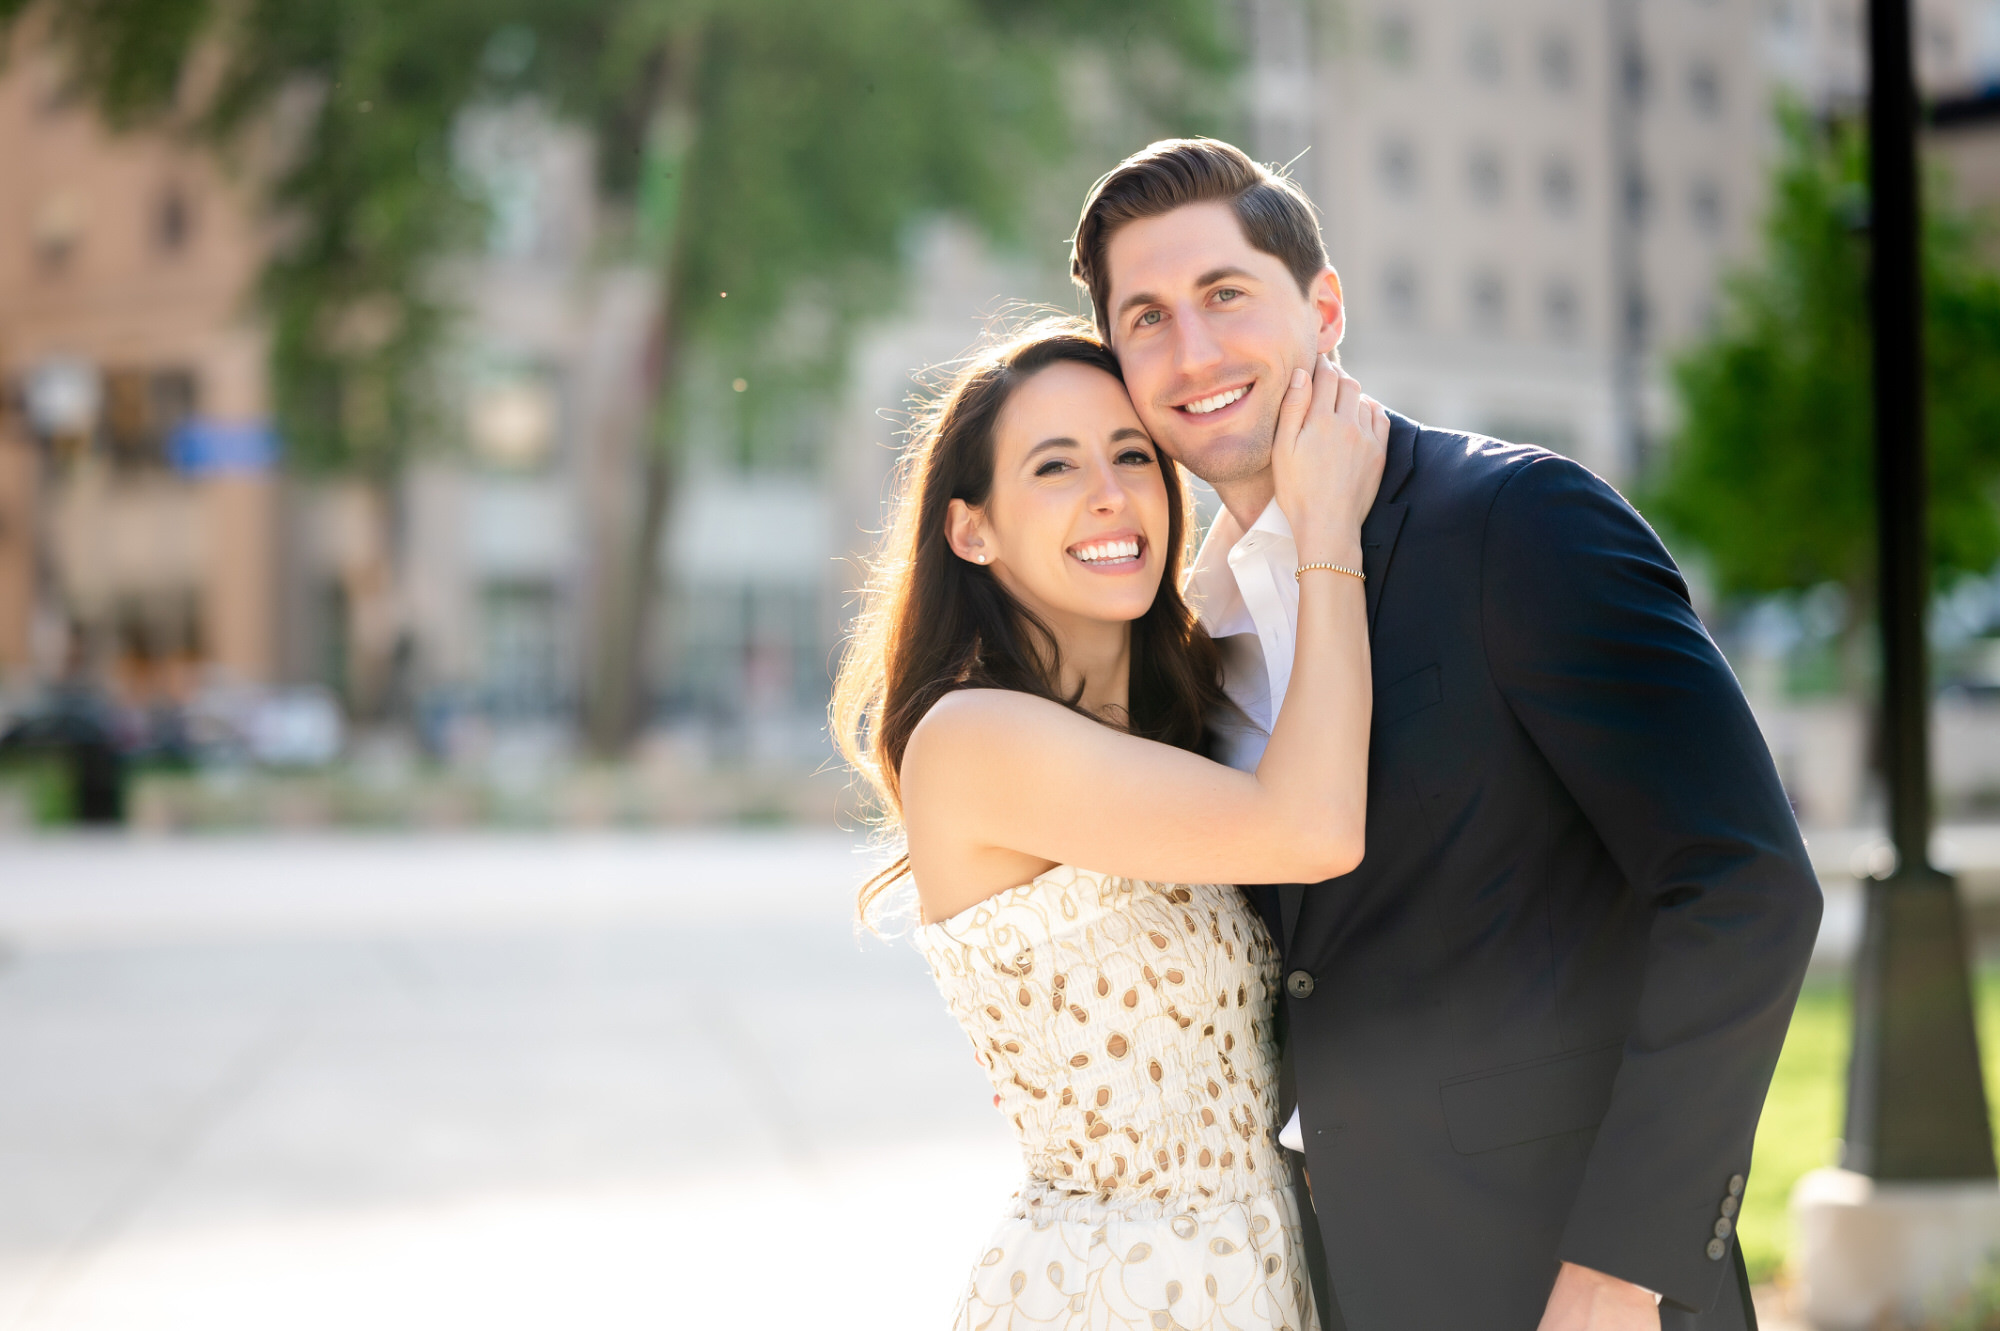 university of pittsburgh engagement picture • Engagement Photography - Leeann Marie Photographer Pittsburgh